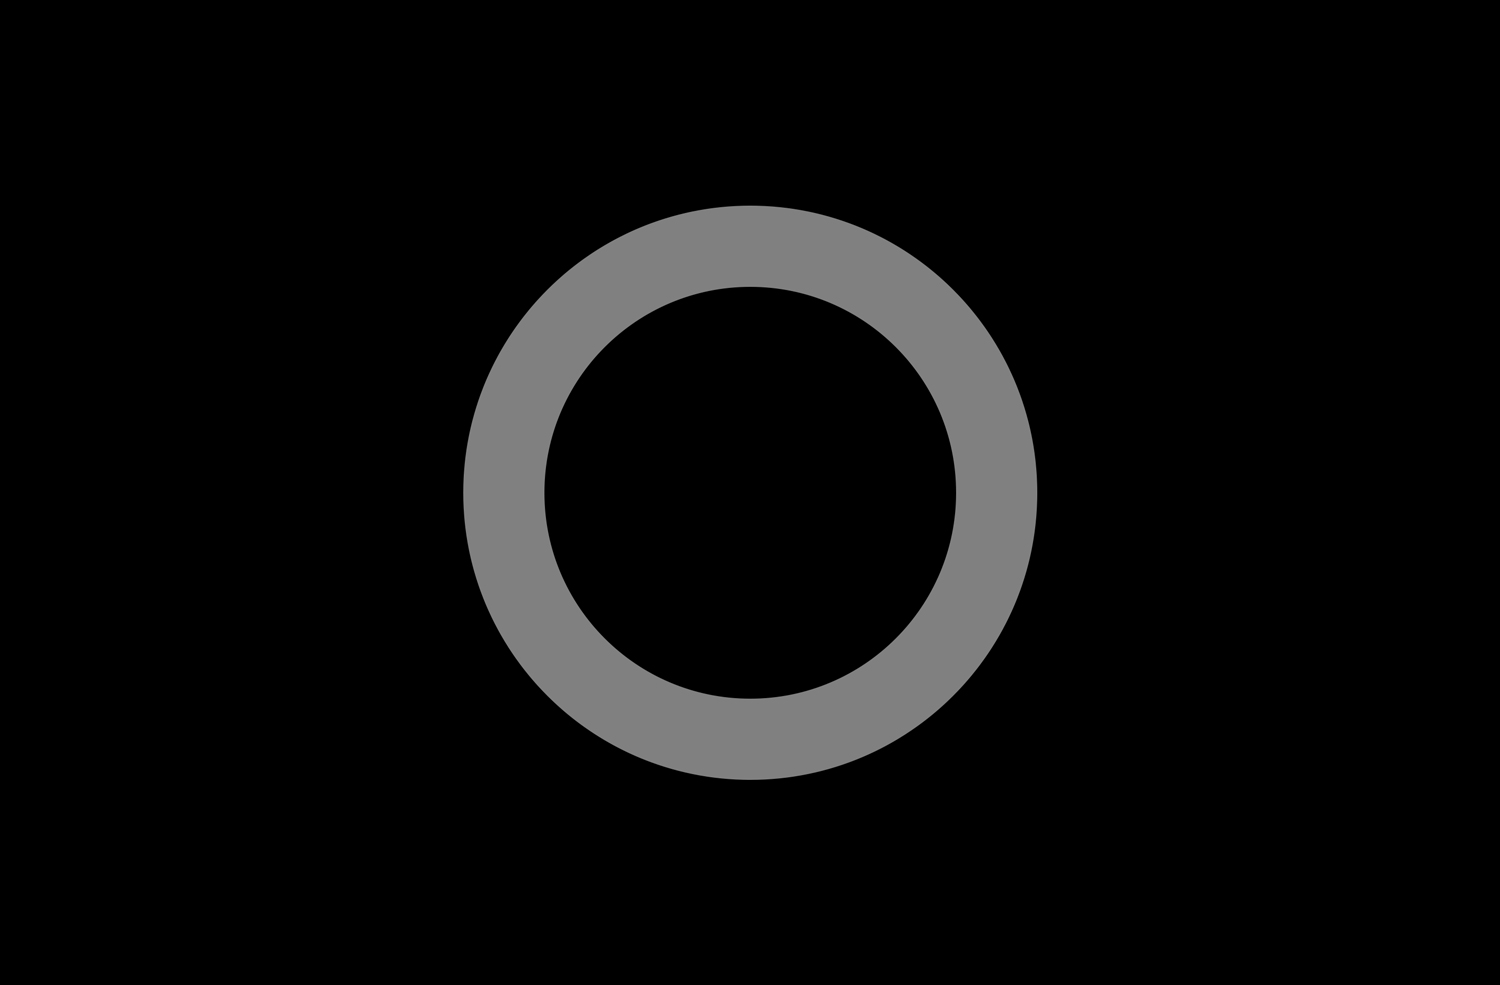 Two concentric circles, black and gray, on a black background in Photoshop